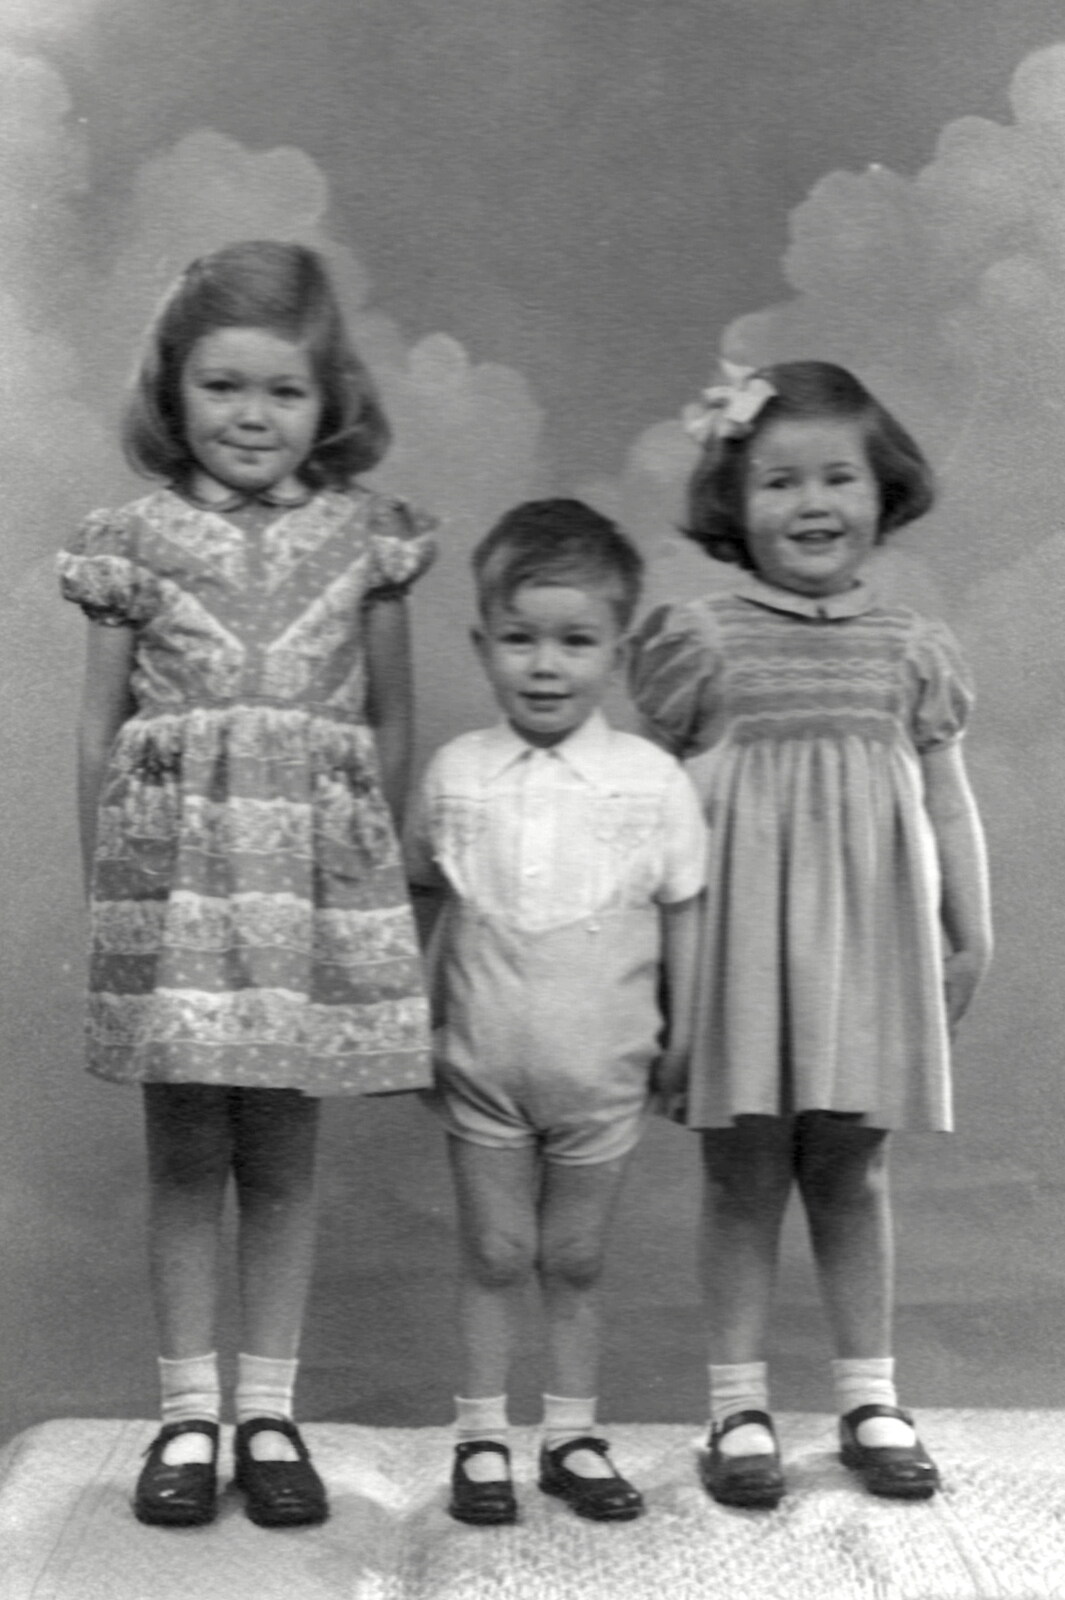 Family History: The 1940s and 1950s - 24th January 2020: The three children